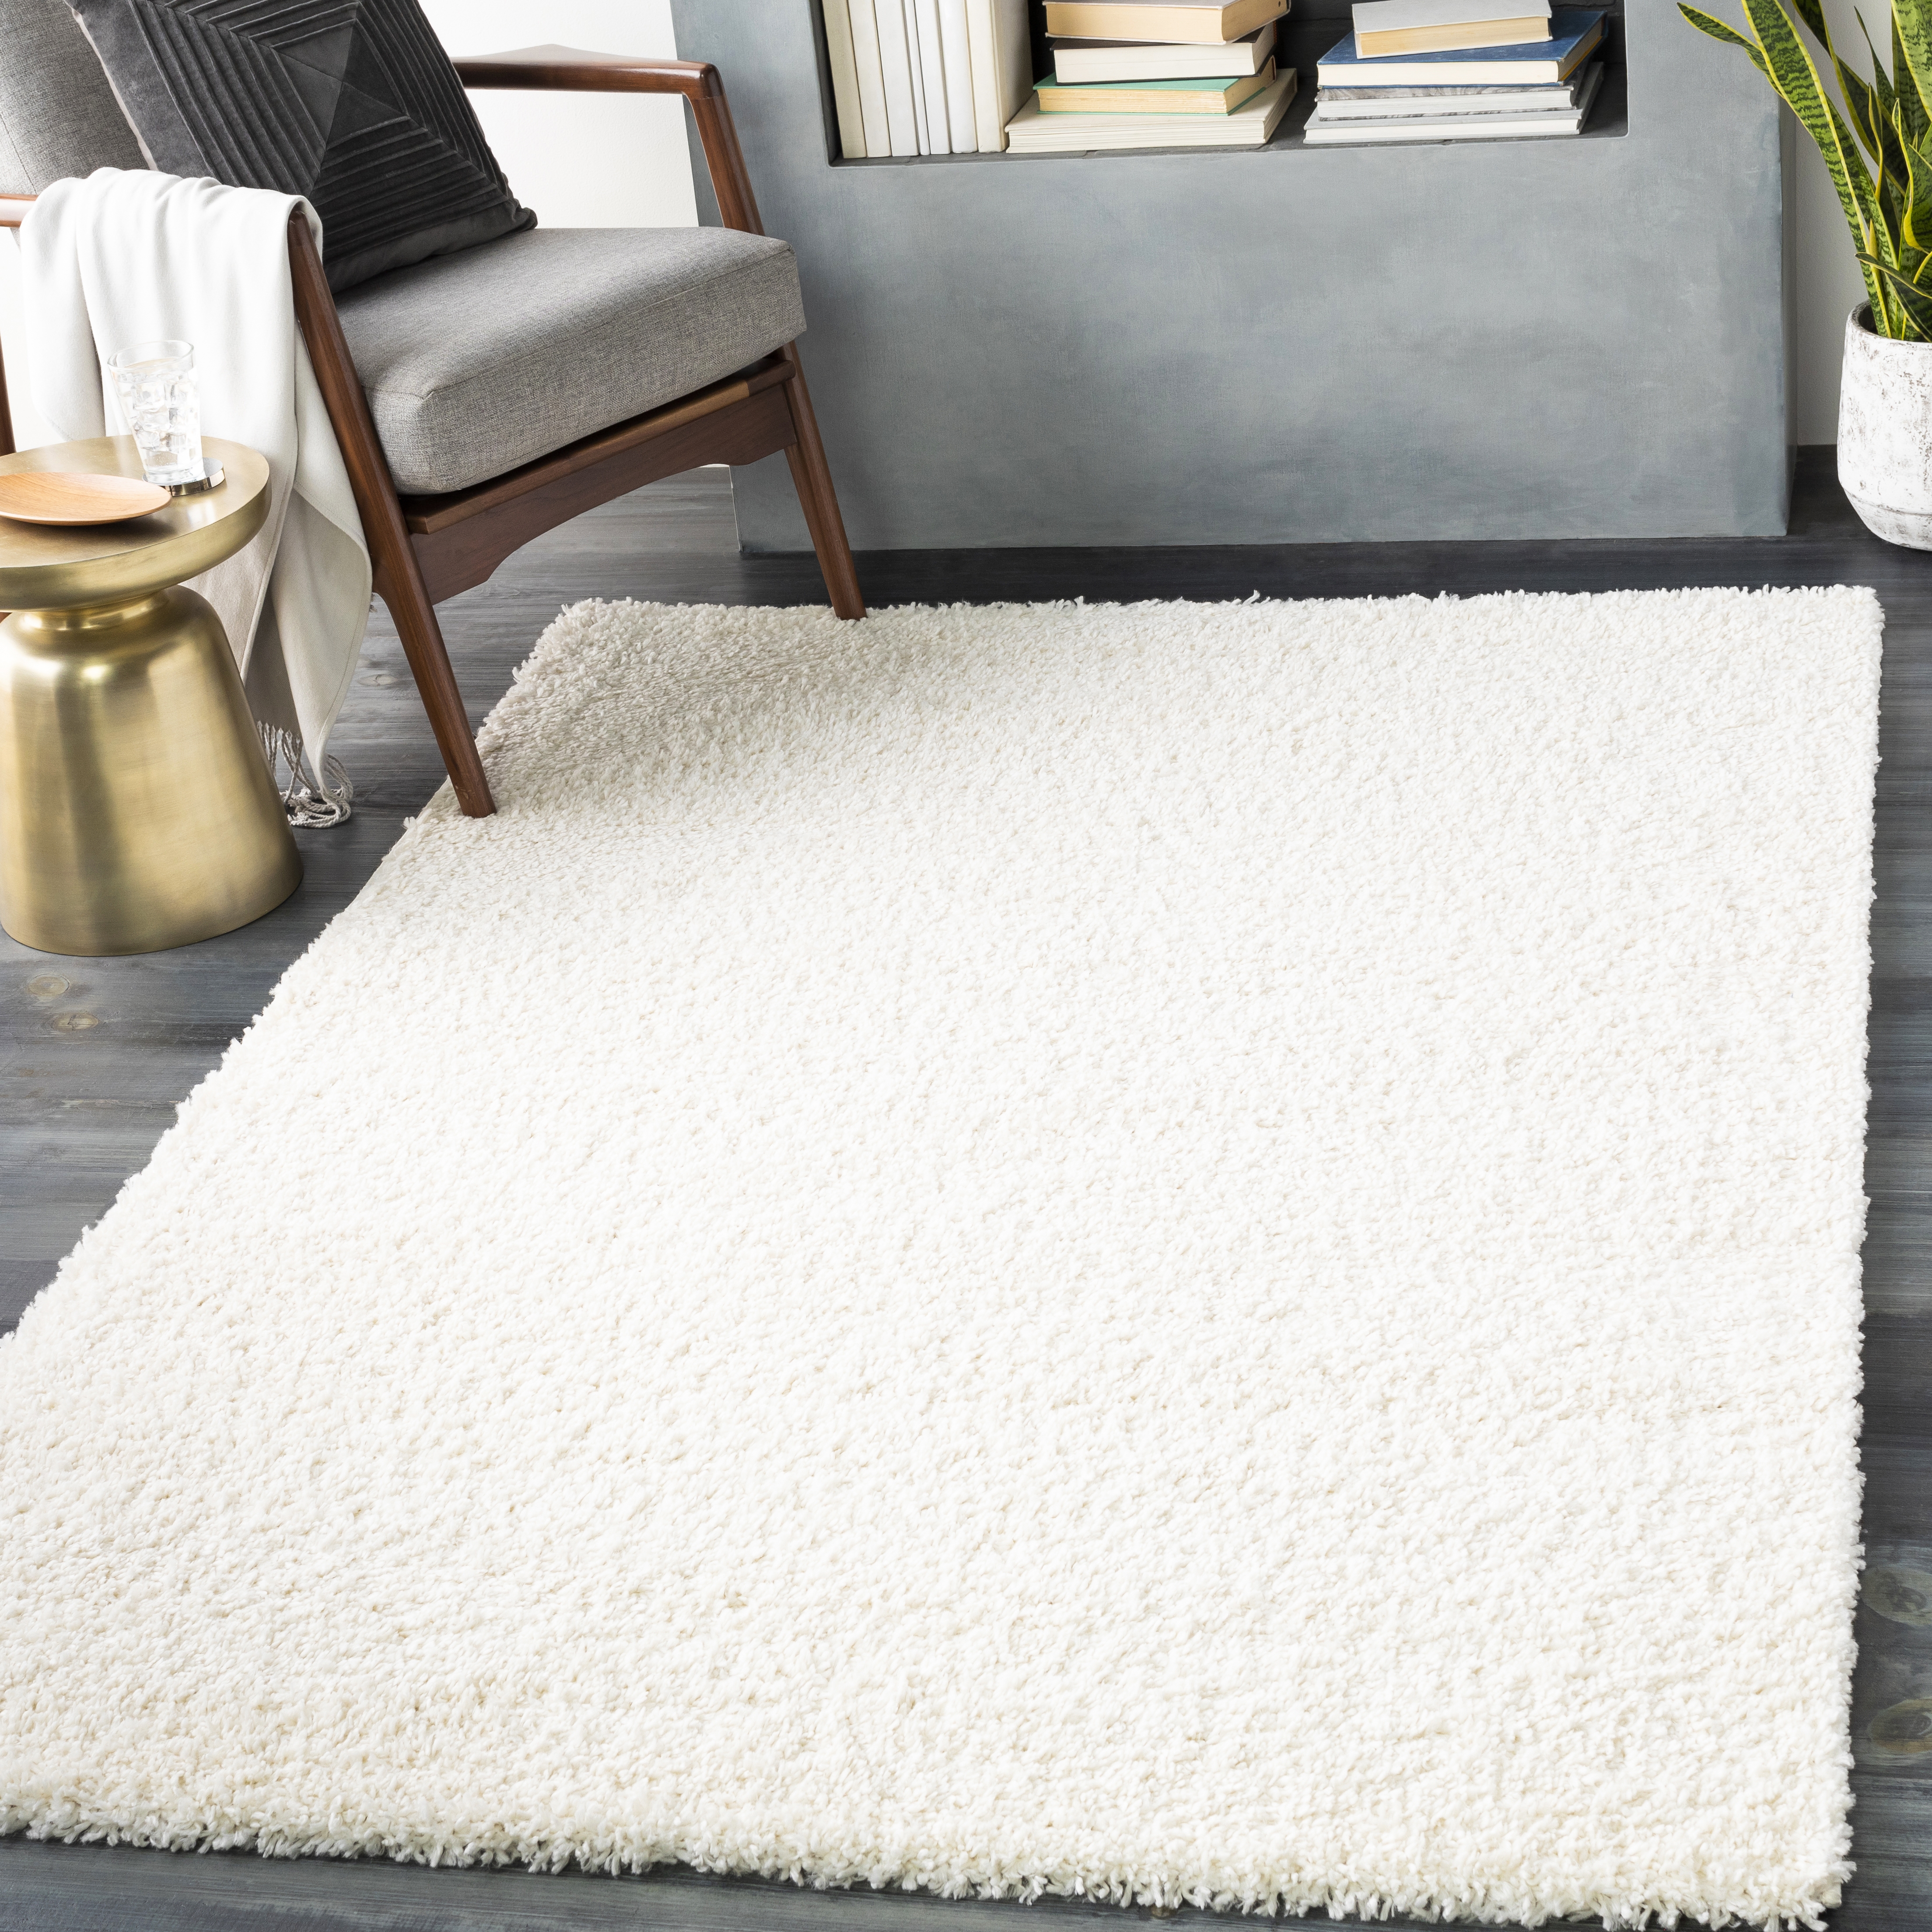 Deluxe Shag Rug, 7'10" x 10'2" - Image 1